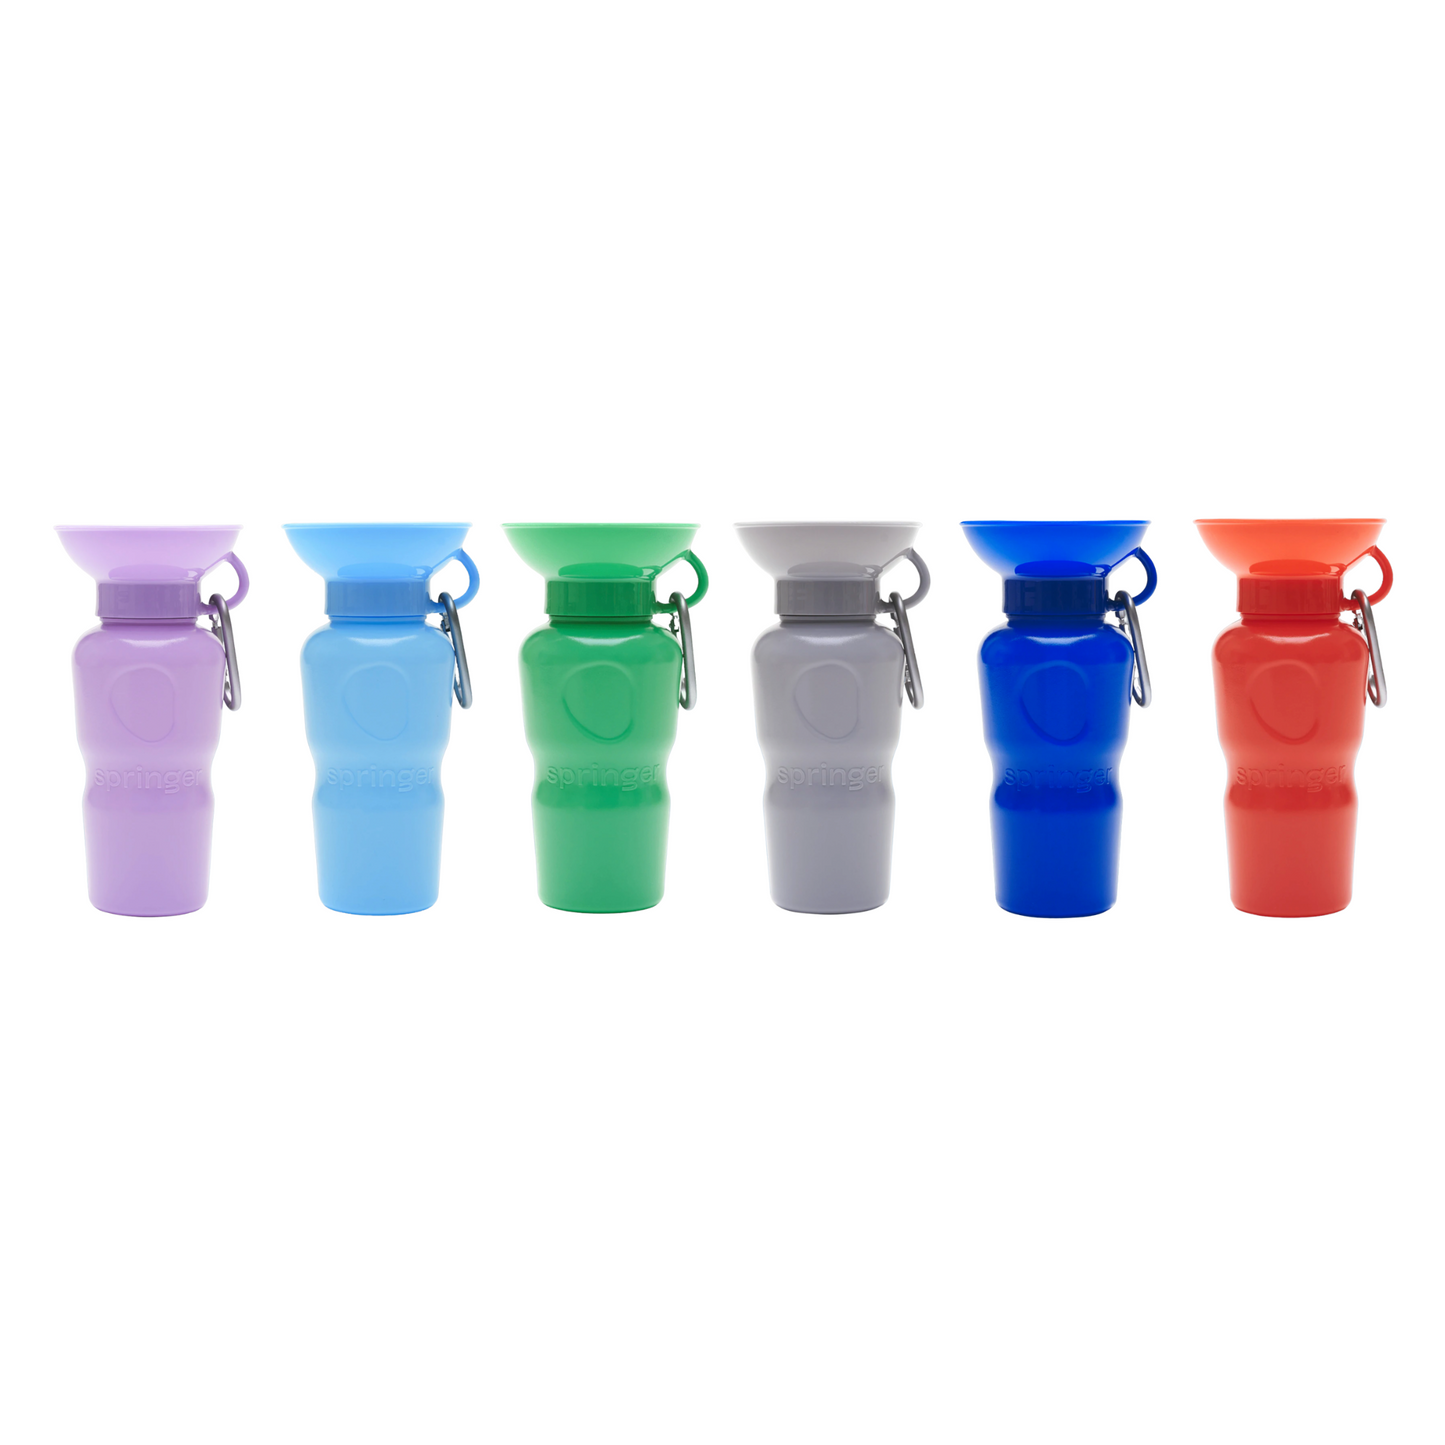 This Springer dog water bottle comes in an array of popular colours and is cleverly designed